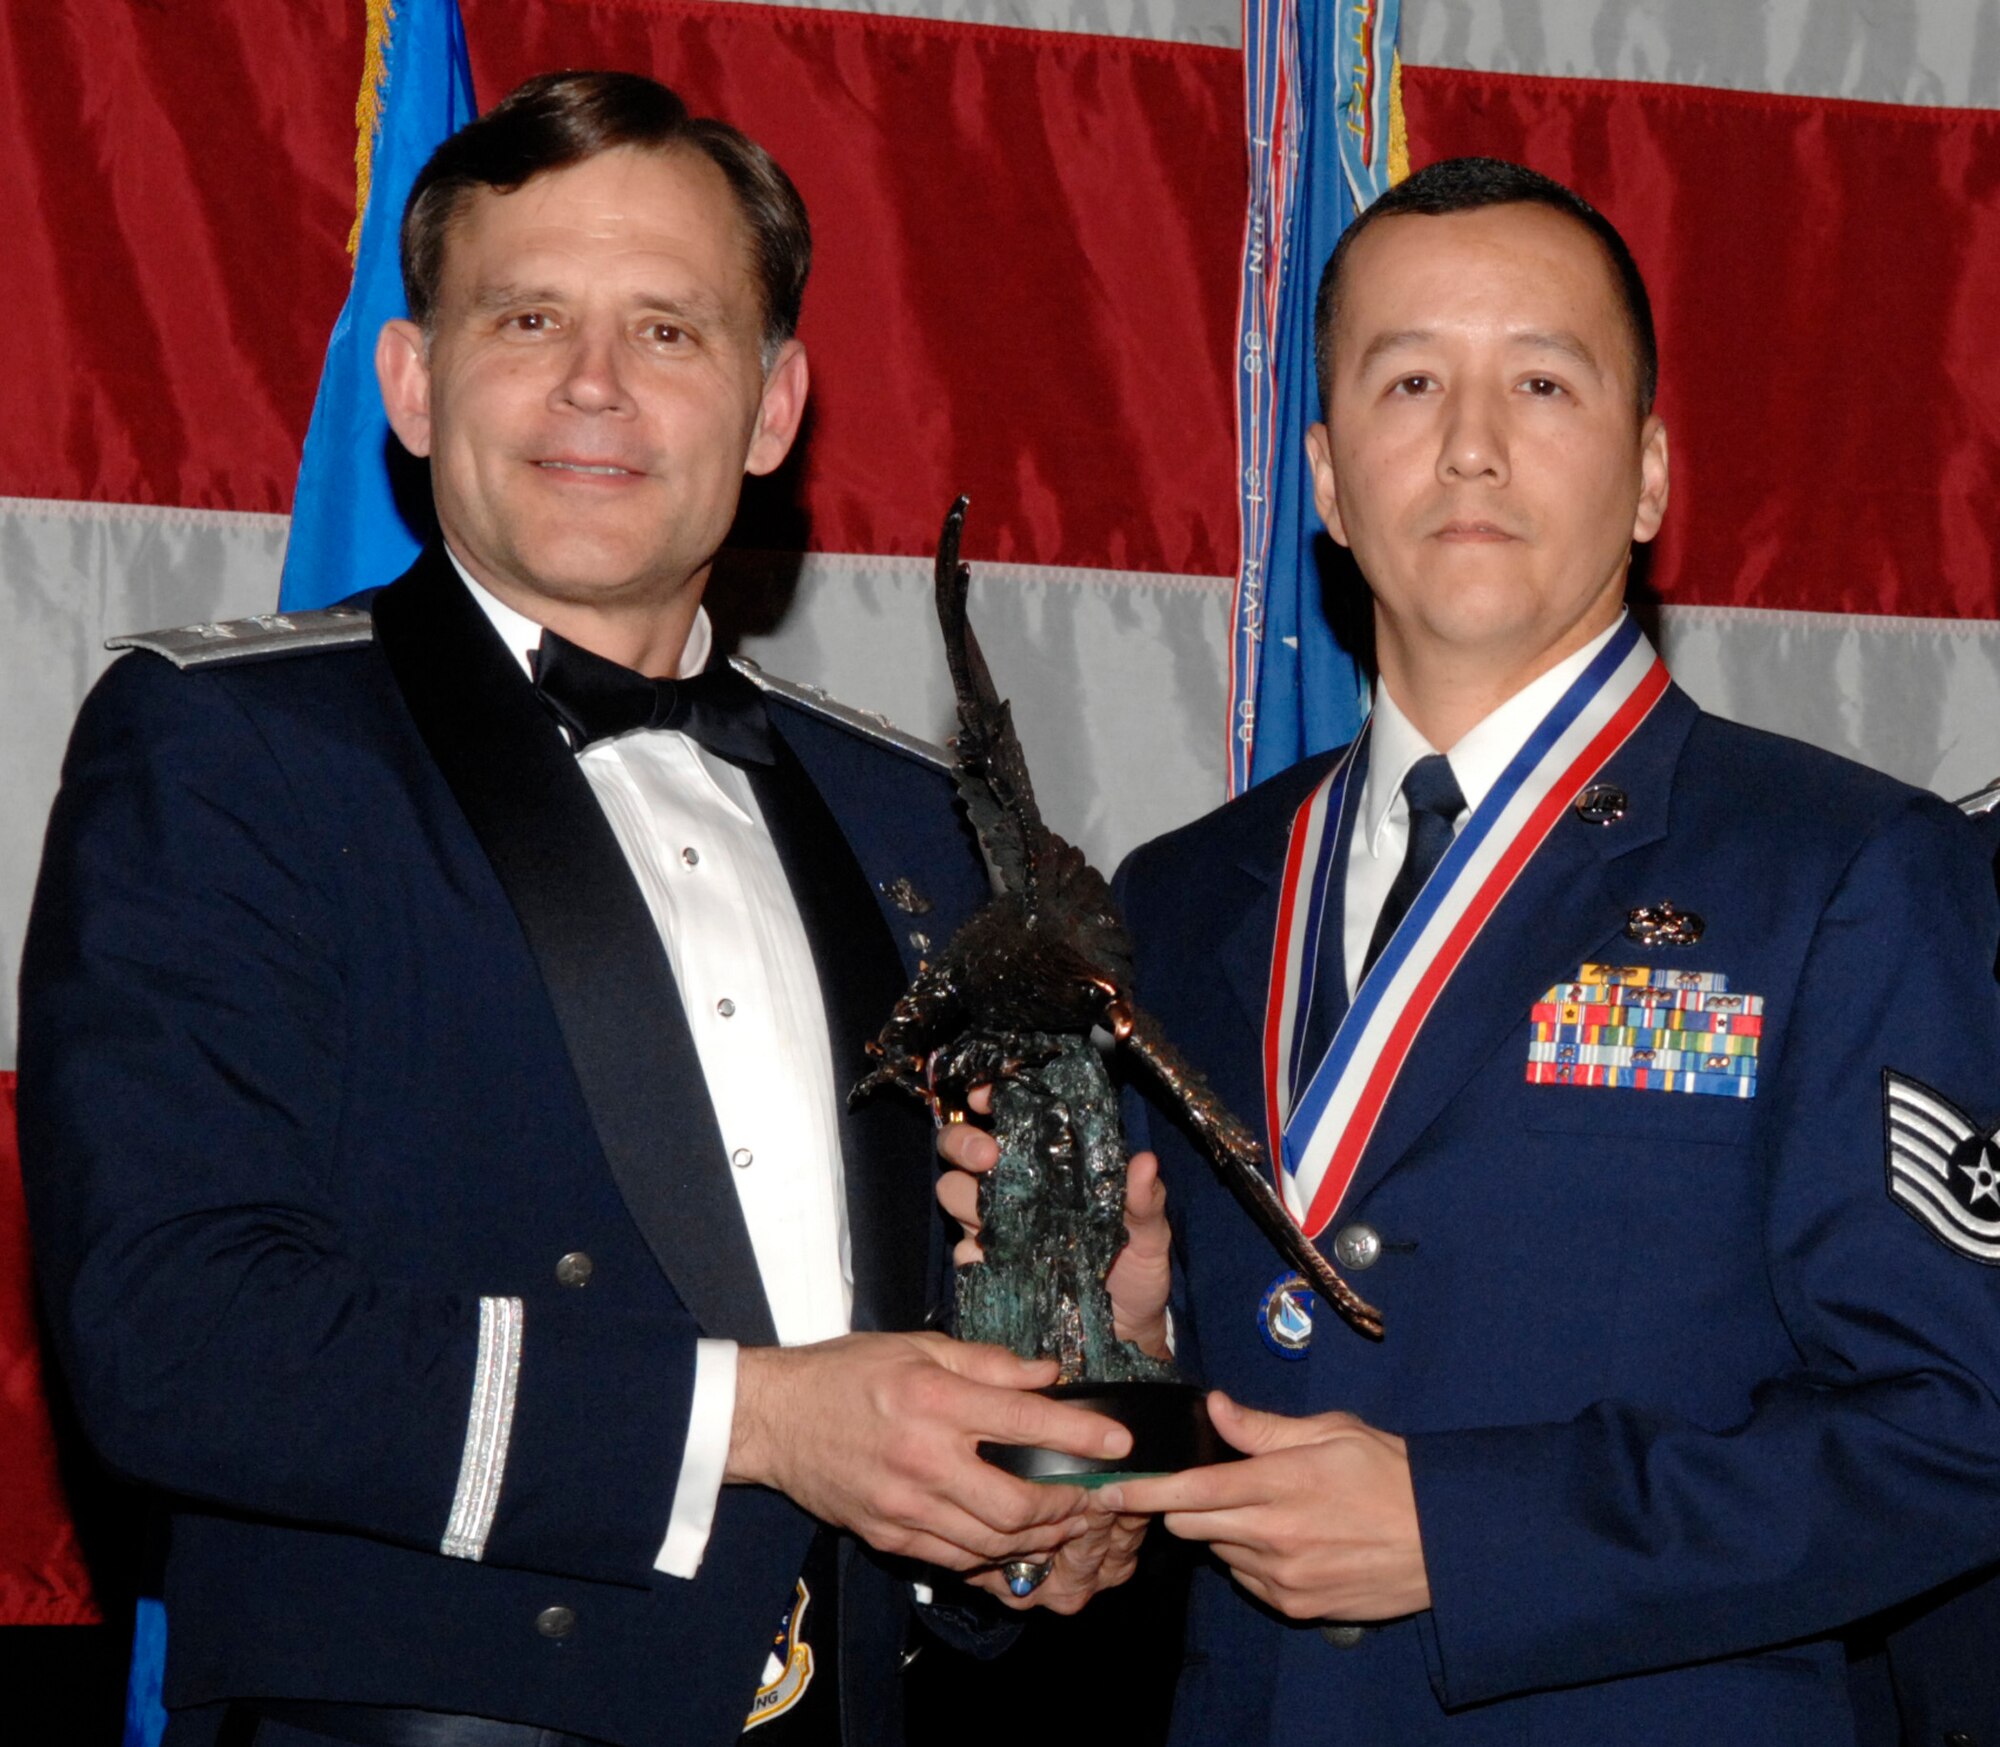 Tech. Sgt. Gene Sing, 16th Electronic Warfare Squadron, won the 53d Wing NCO of the Year Award  during the annual awards banquet Jan. 31 at the Emerald Coast Conference Center.  The night’s guest speaker and former 53d commander, Maj. Gen. (Retired) Jack Catton (left) presented the awards.  U.S. Air Force photo.